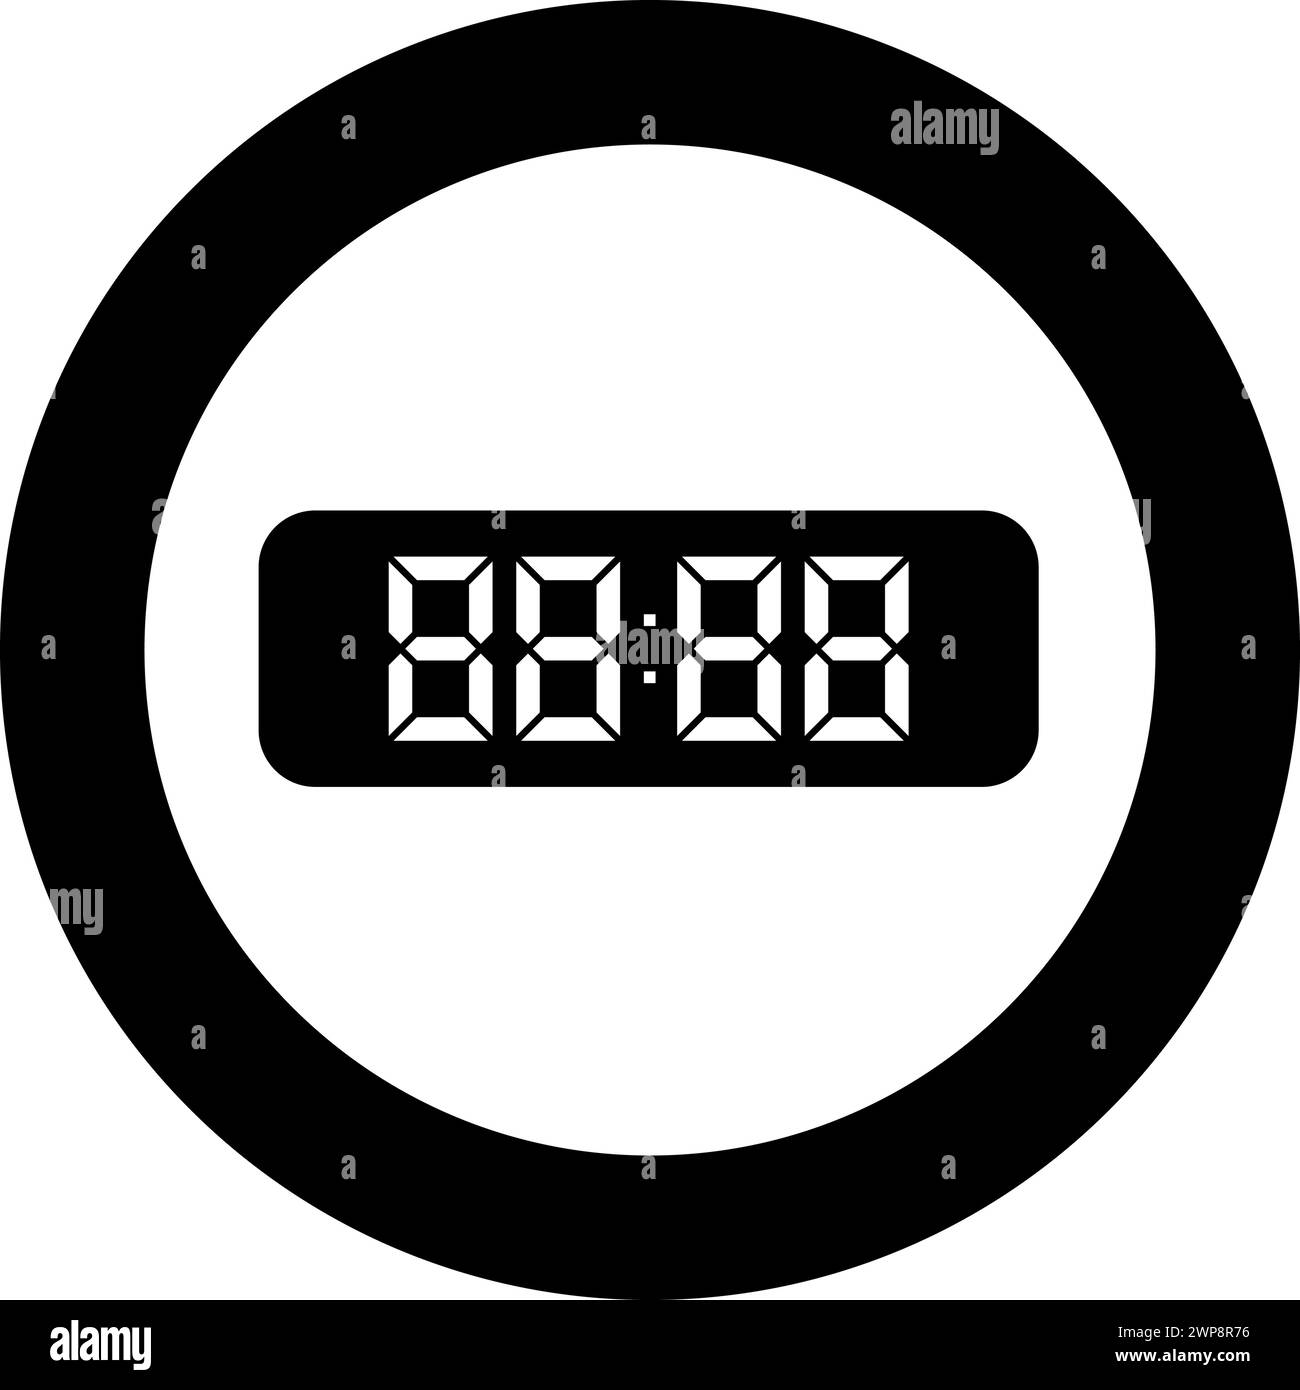 Digital table clock electronic display desk watch icon in circle round black color vector illustration image solid outline style simple Stock Vector